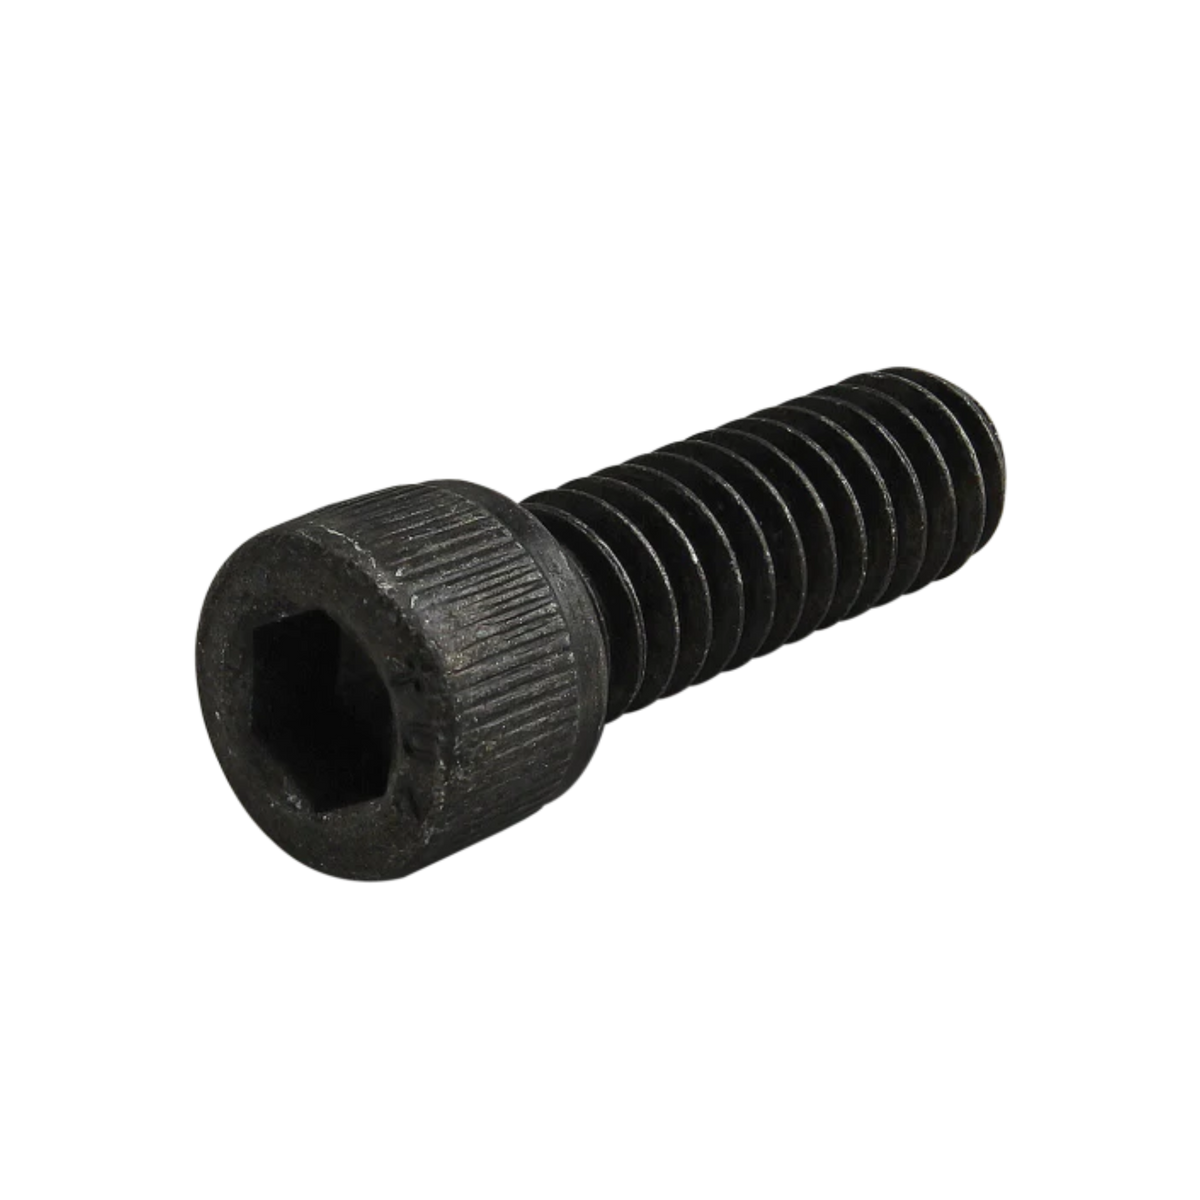 side view of a black metal screw with a hex head on the left and threading on the right